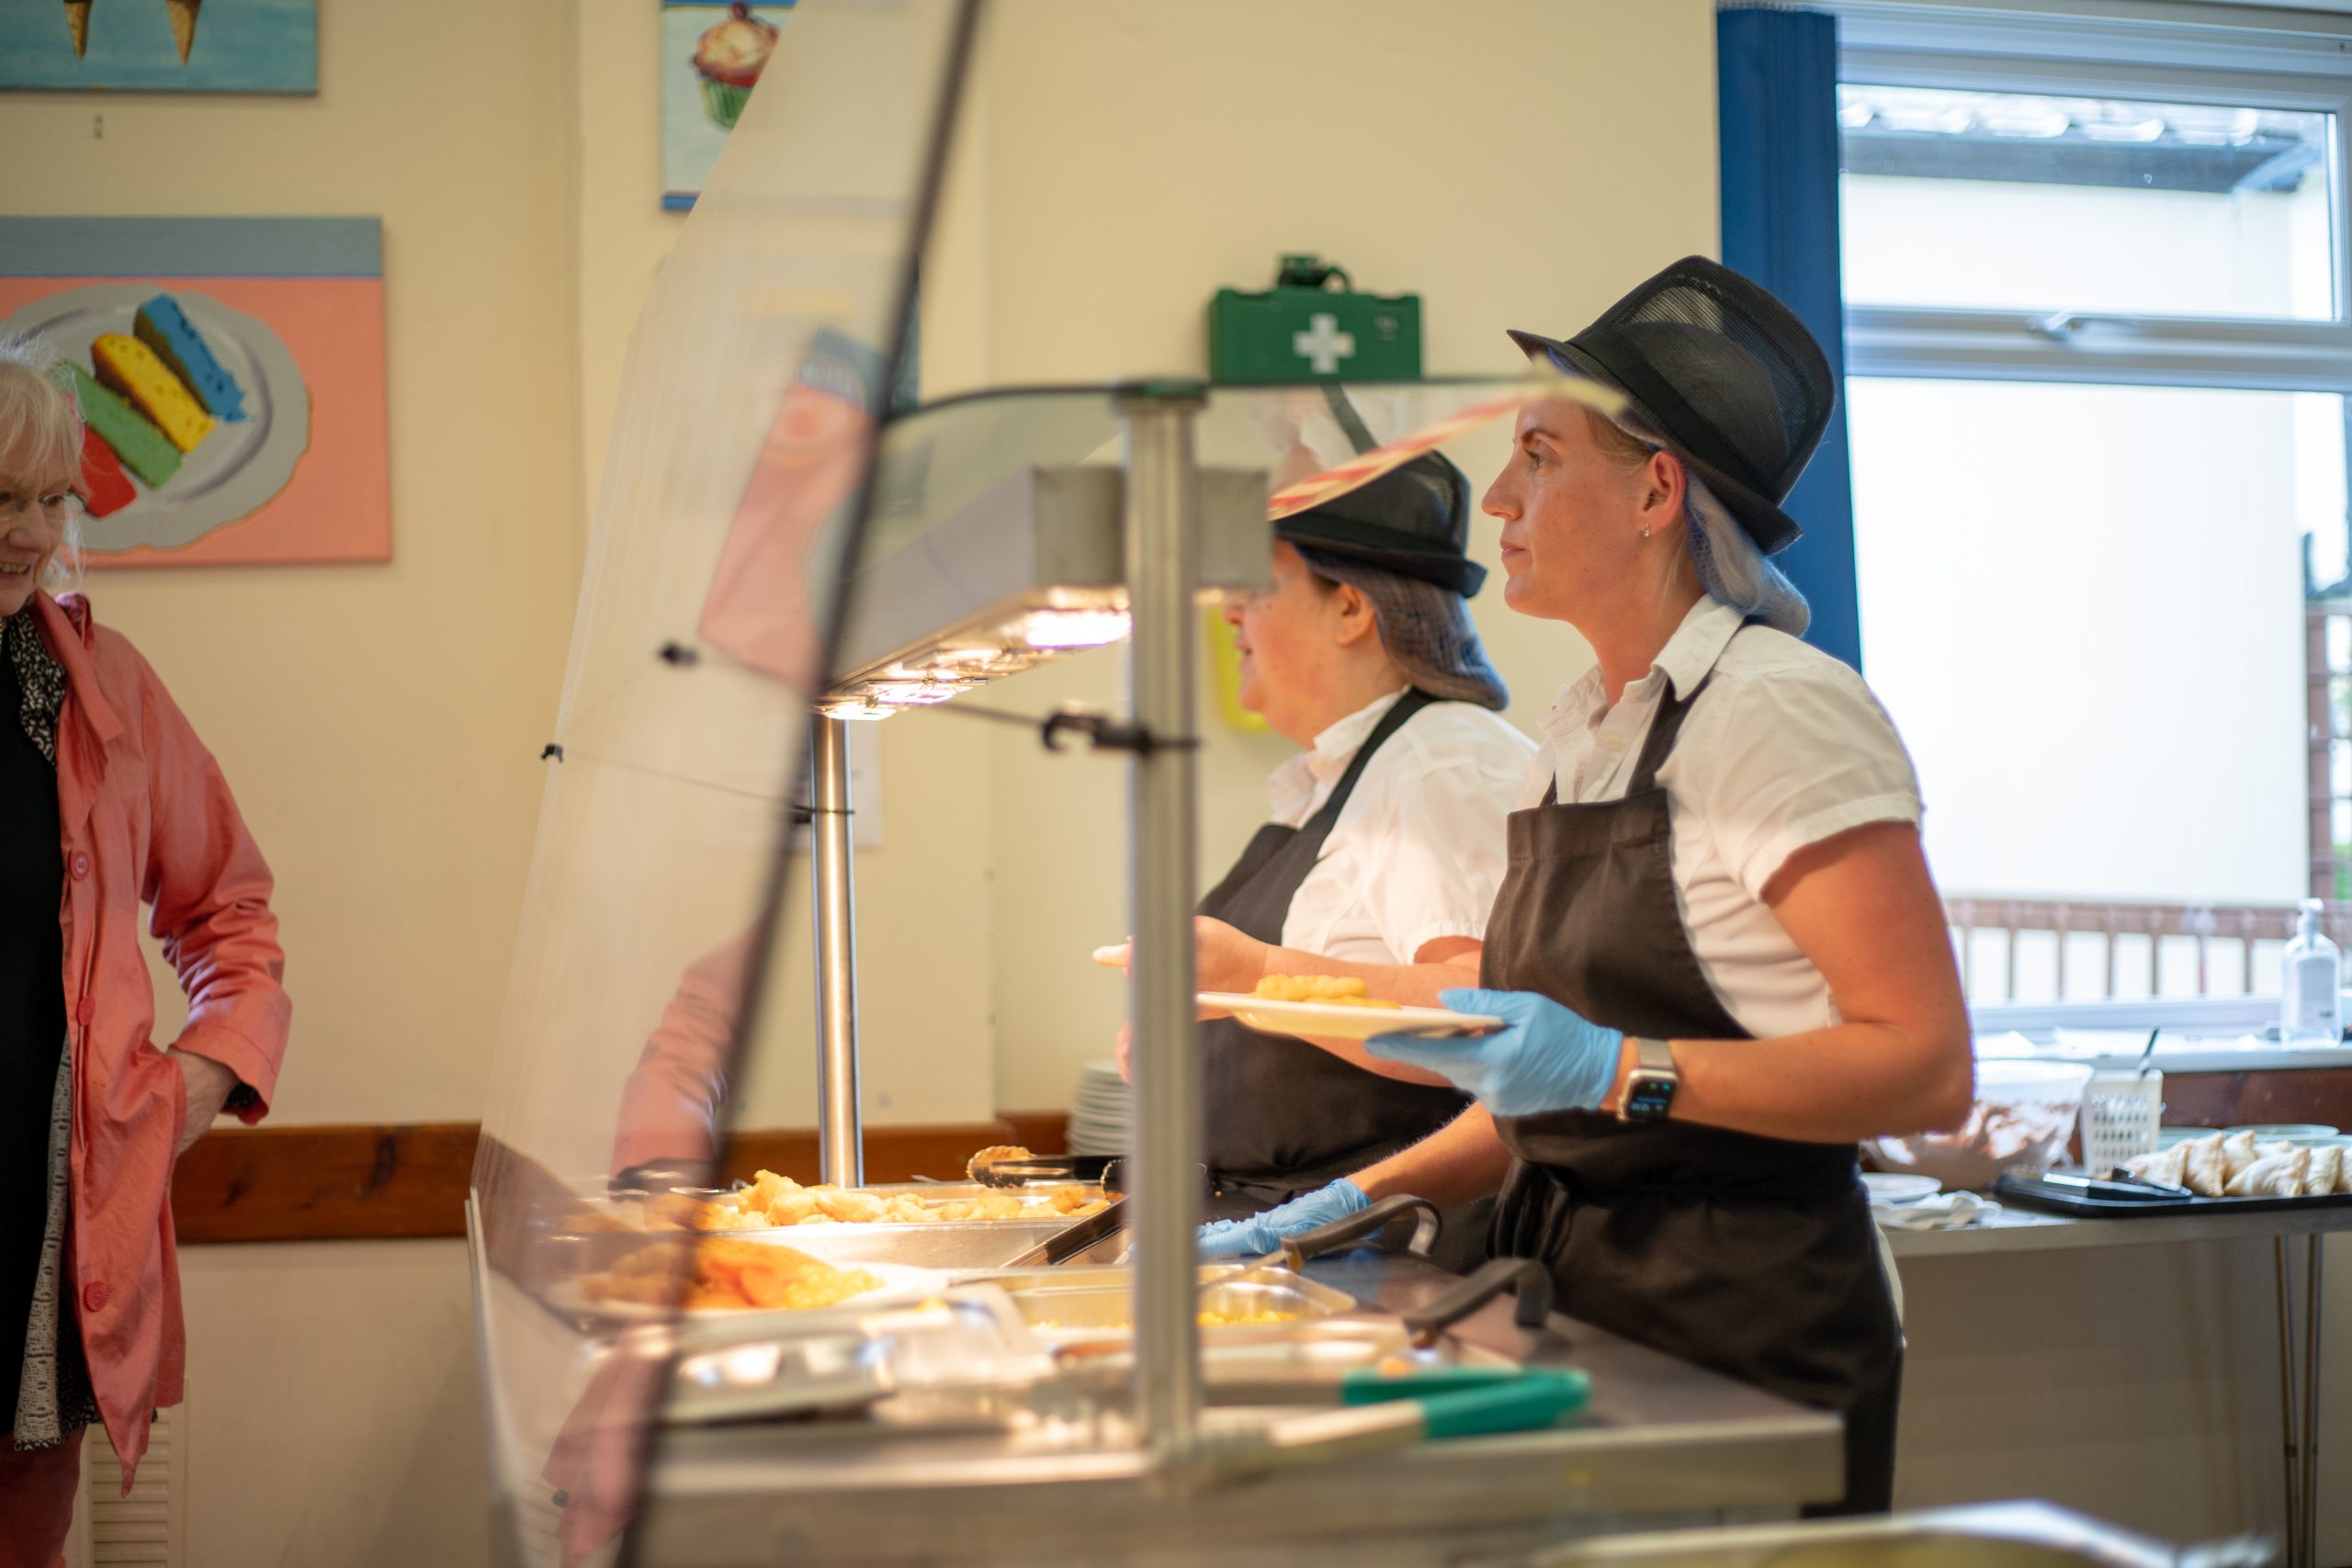 Rookwood School staff serve hot lunch food in the dining area.